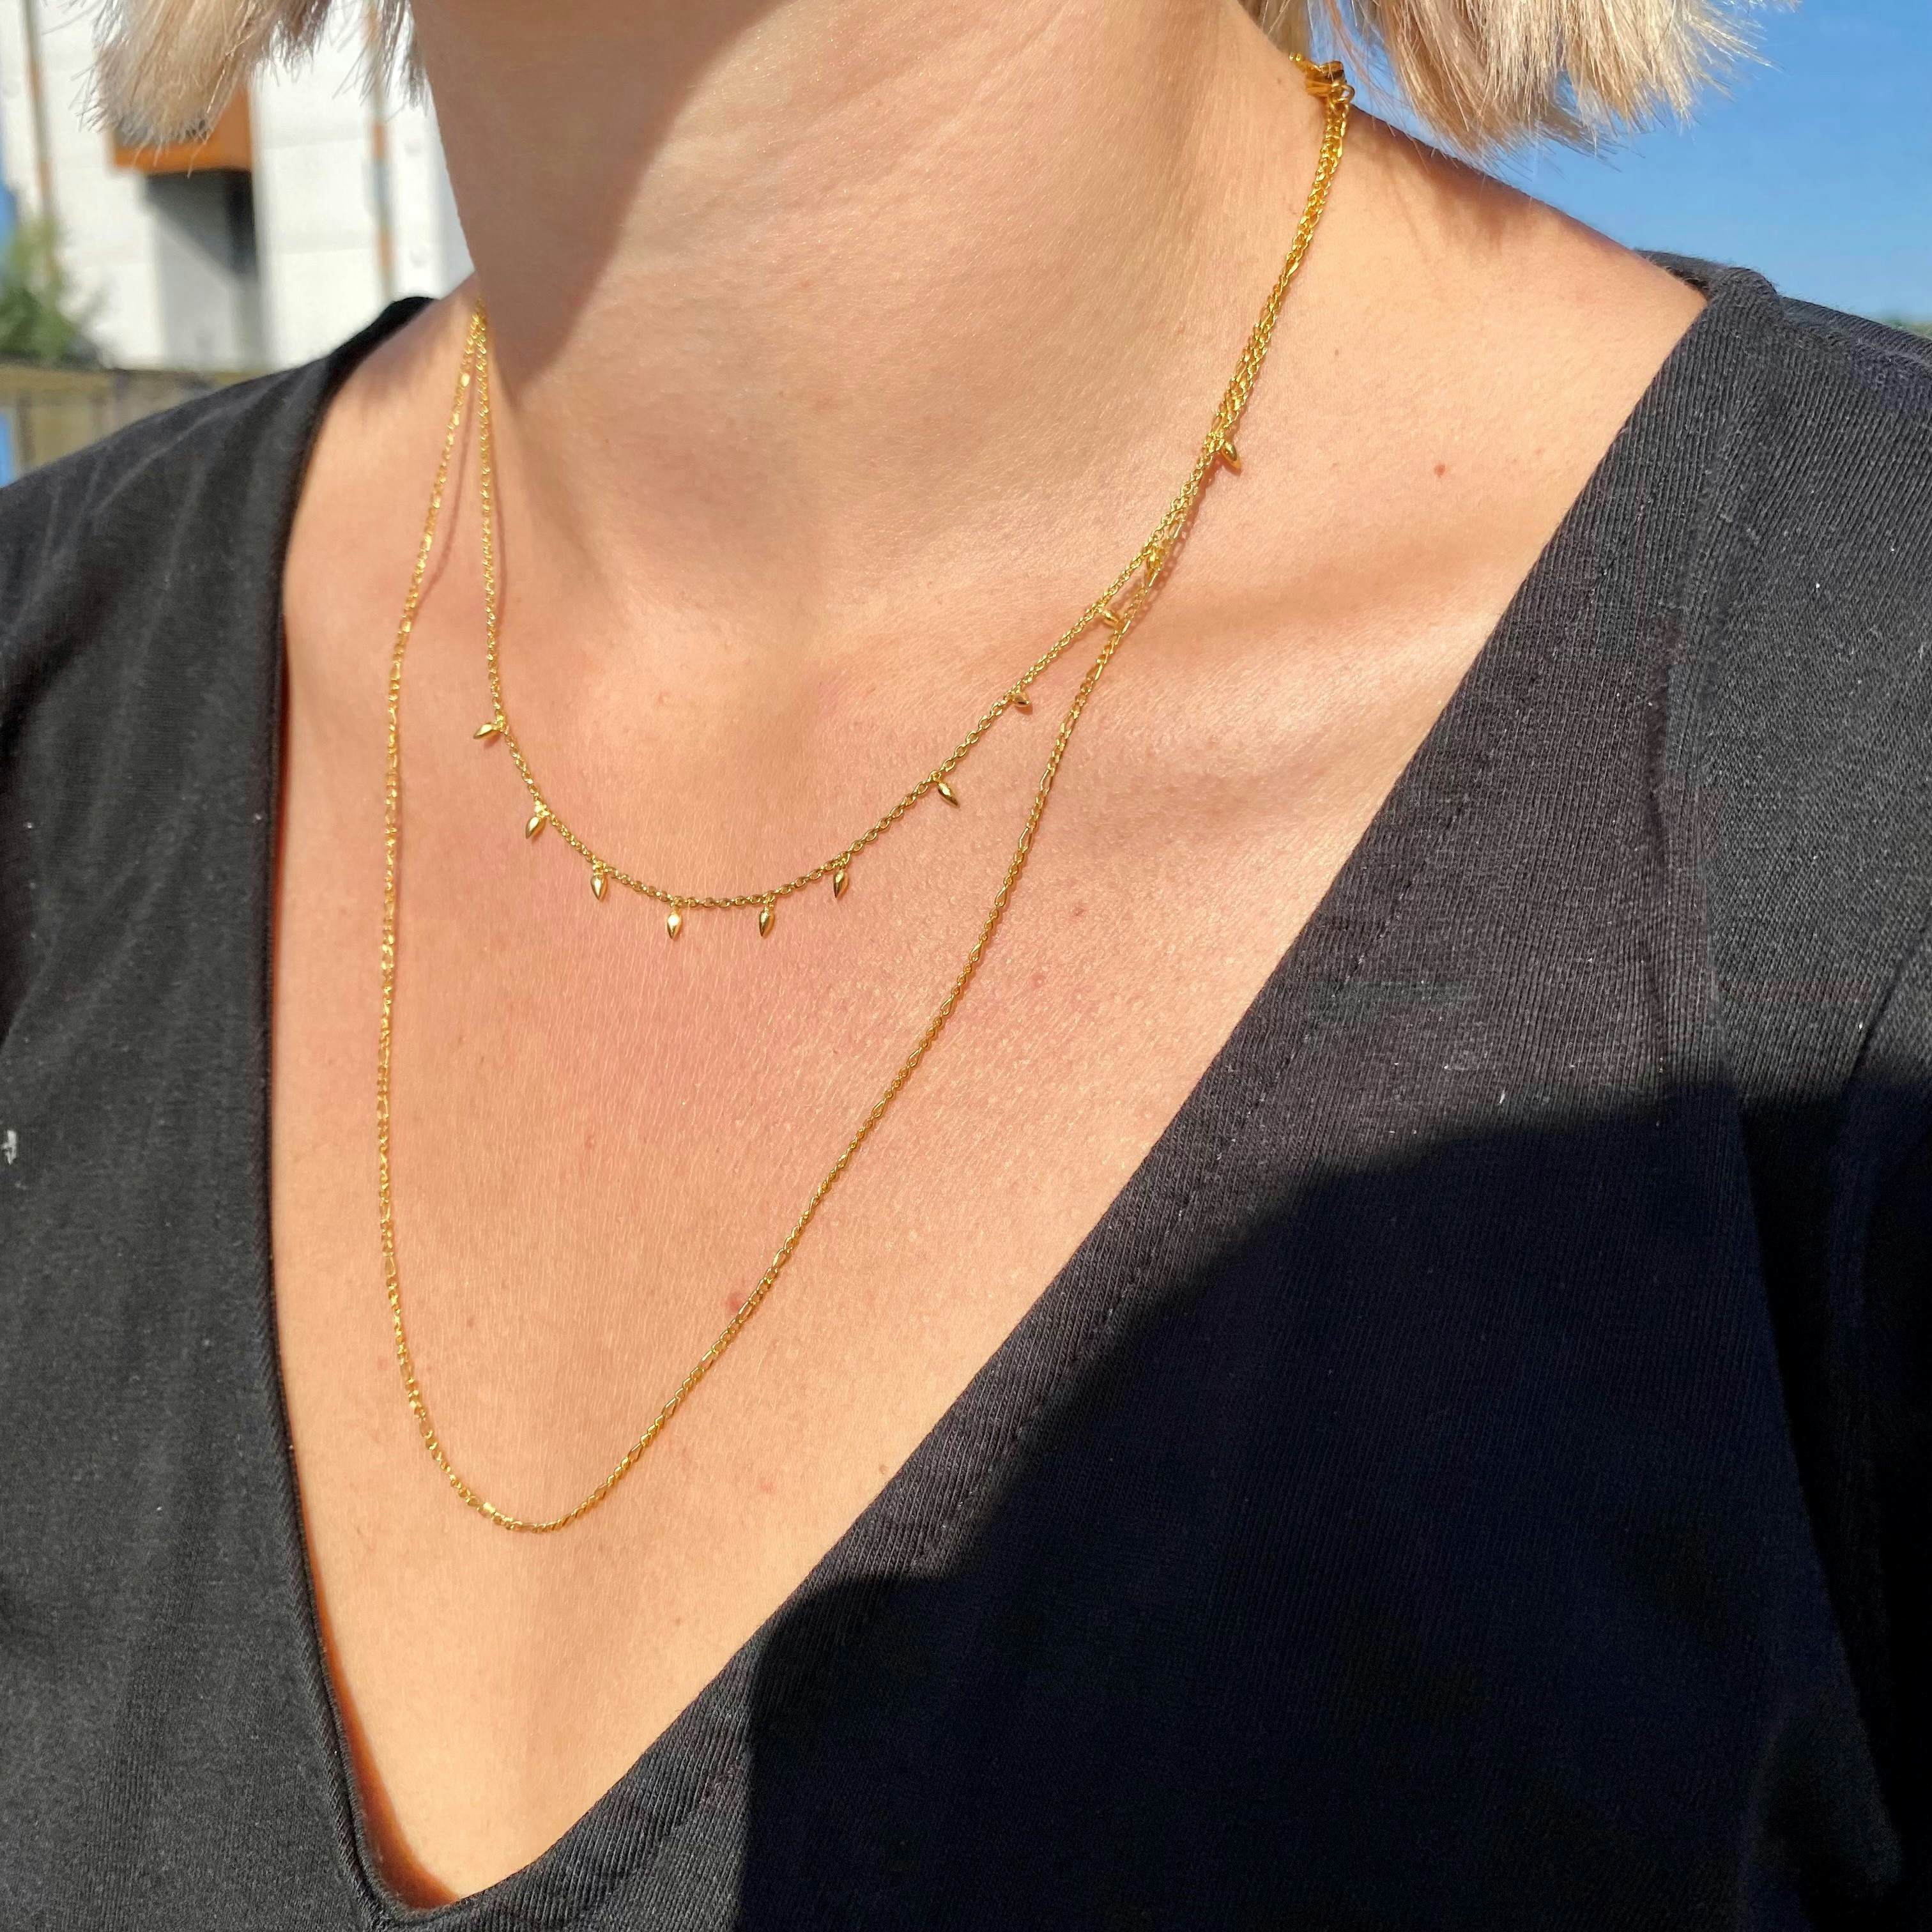 Figaros necklace from Maanesten in Goldplated-Silver Sterling 925|Blank